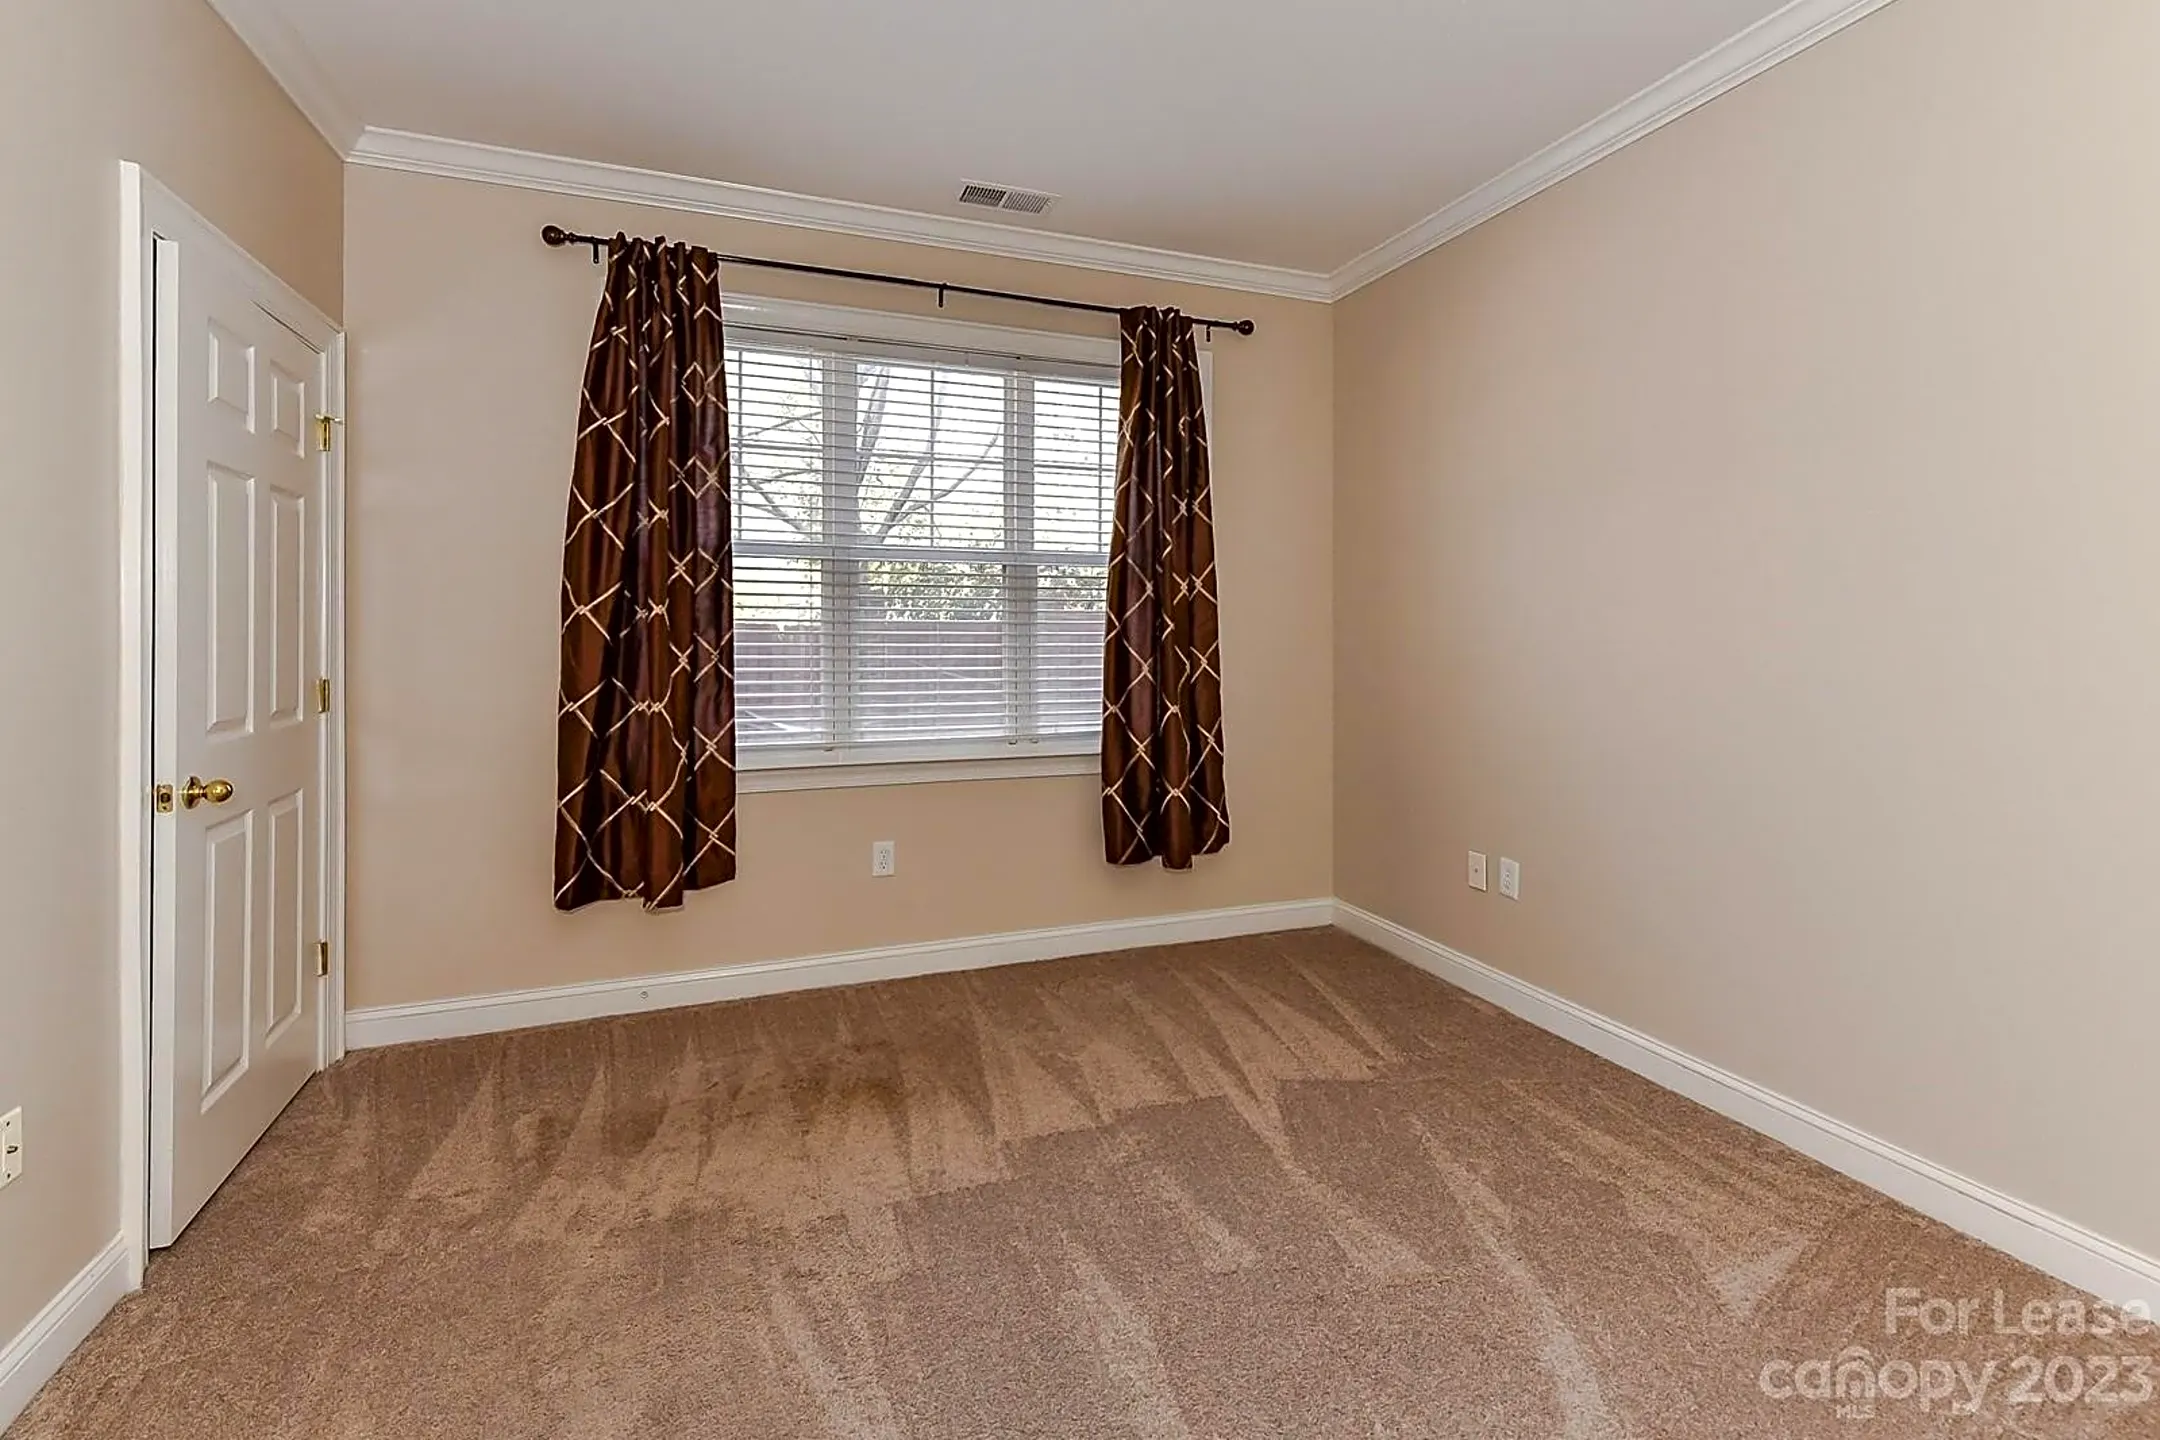 Bedroom - 5609 Fairview Rd #1 - Charlotte, NC